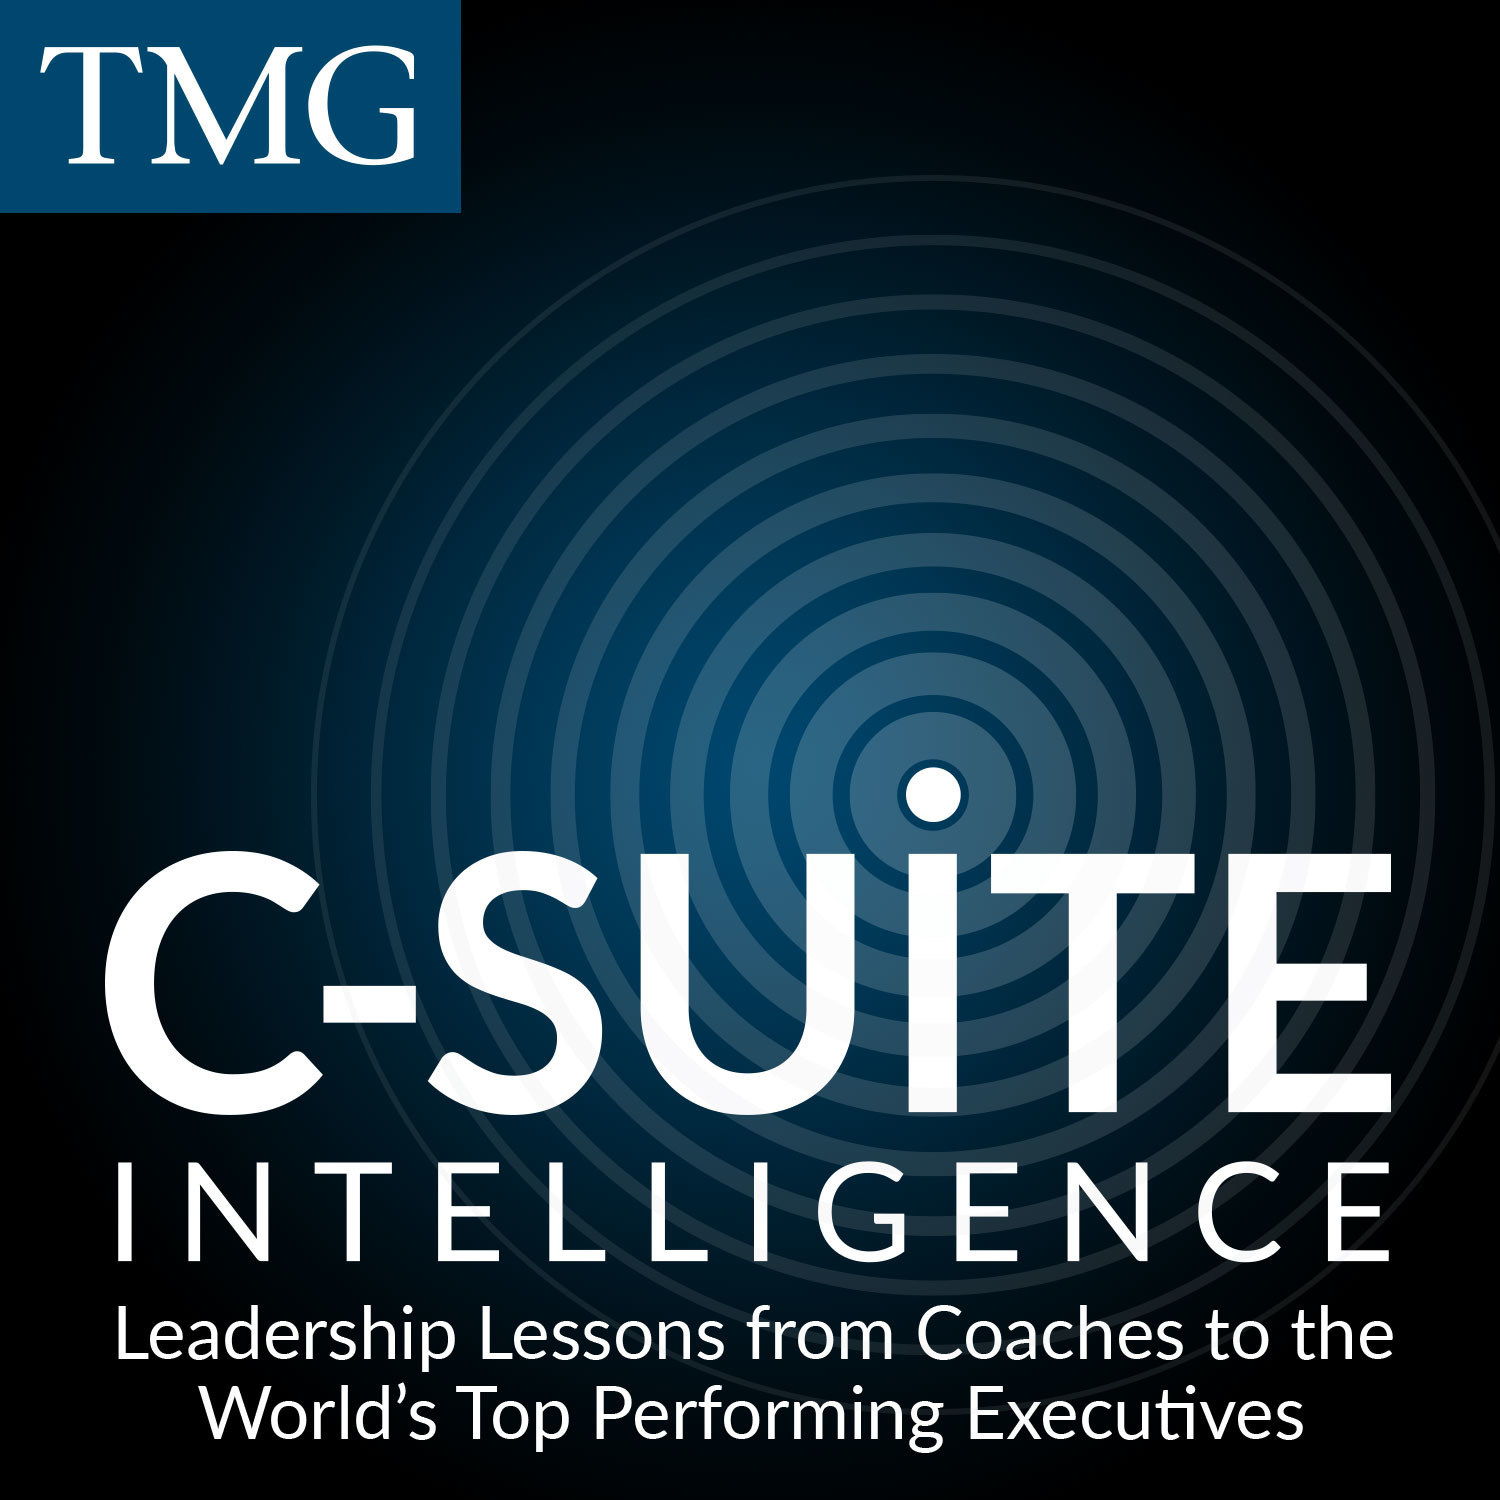 C-Suite Intelligence, the go-to podcast for high performers and aspiring leaders. Hear top executive coaches at The Miles Group discuss how successful leaders amp up their game, even as business conditions grow more complex every day. Learn the secrets of the highest performers and use this intelligence to power your career. https://miles-group.com/podcast/ (PRNewsfoto/The Miles Group/TMG)